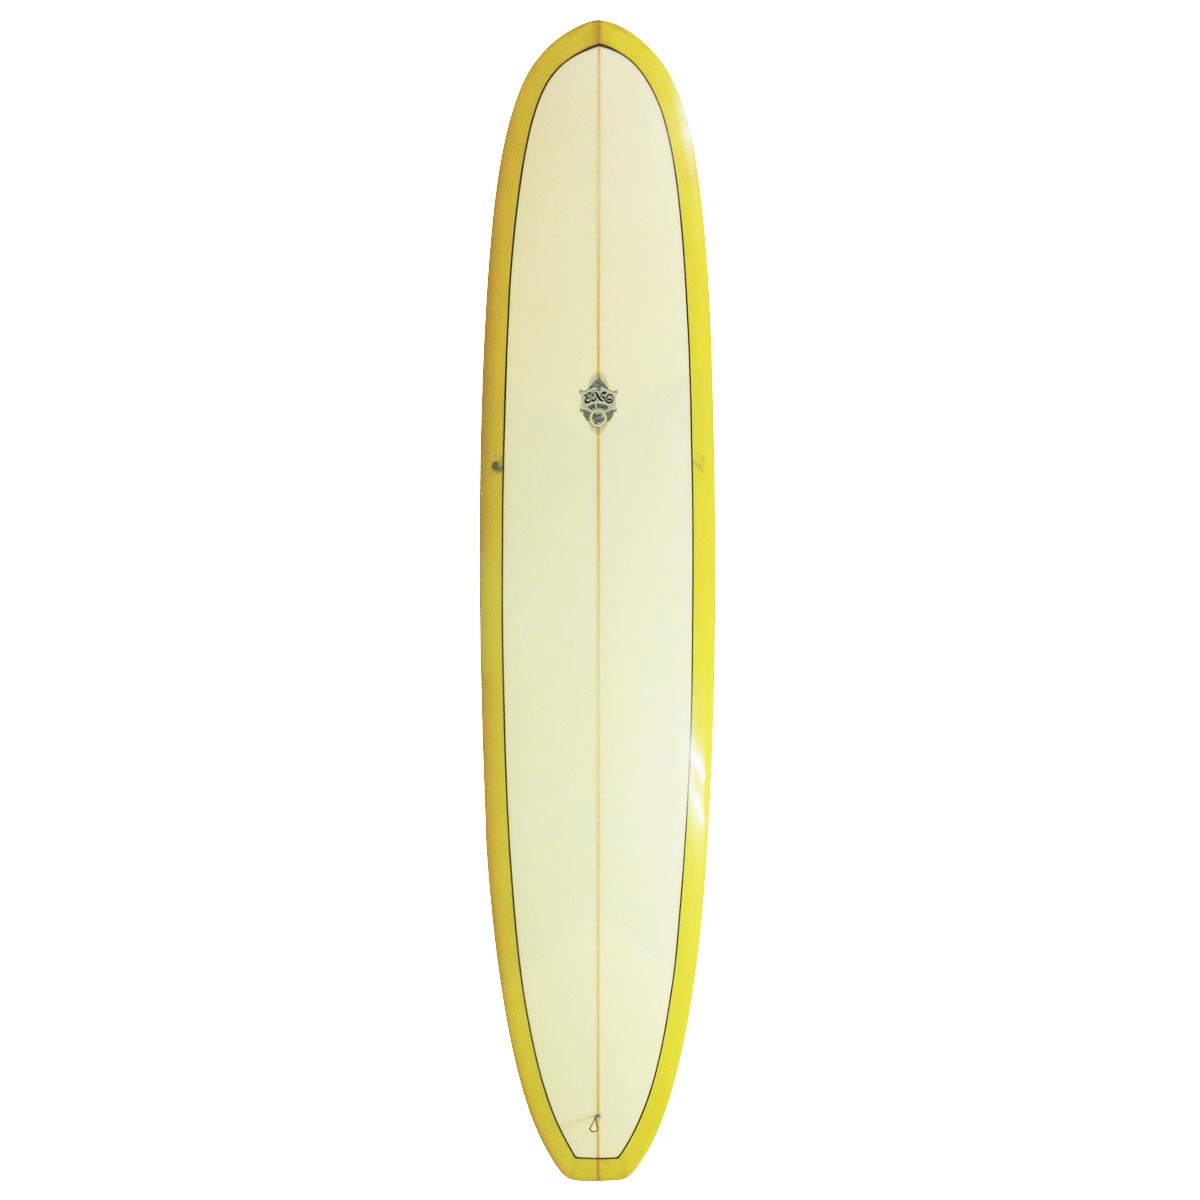  / ENO SURFBOARDS / CLASSIC ALL ROUND 9`0